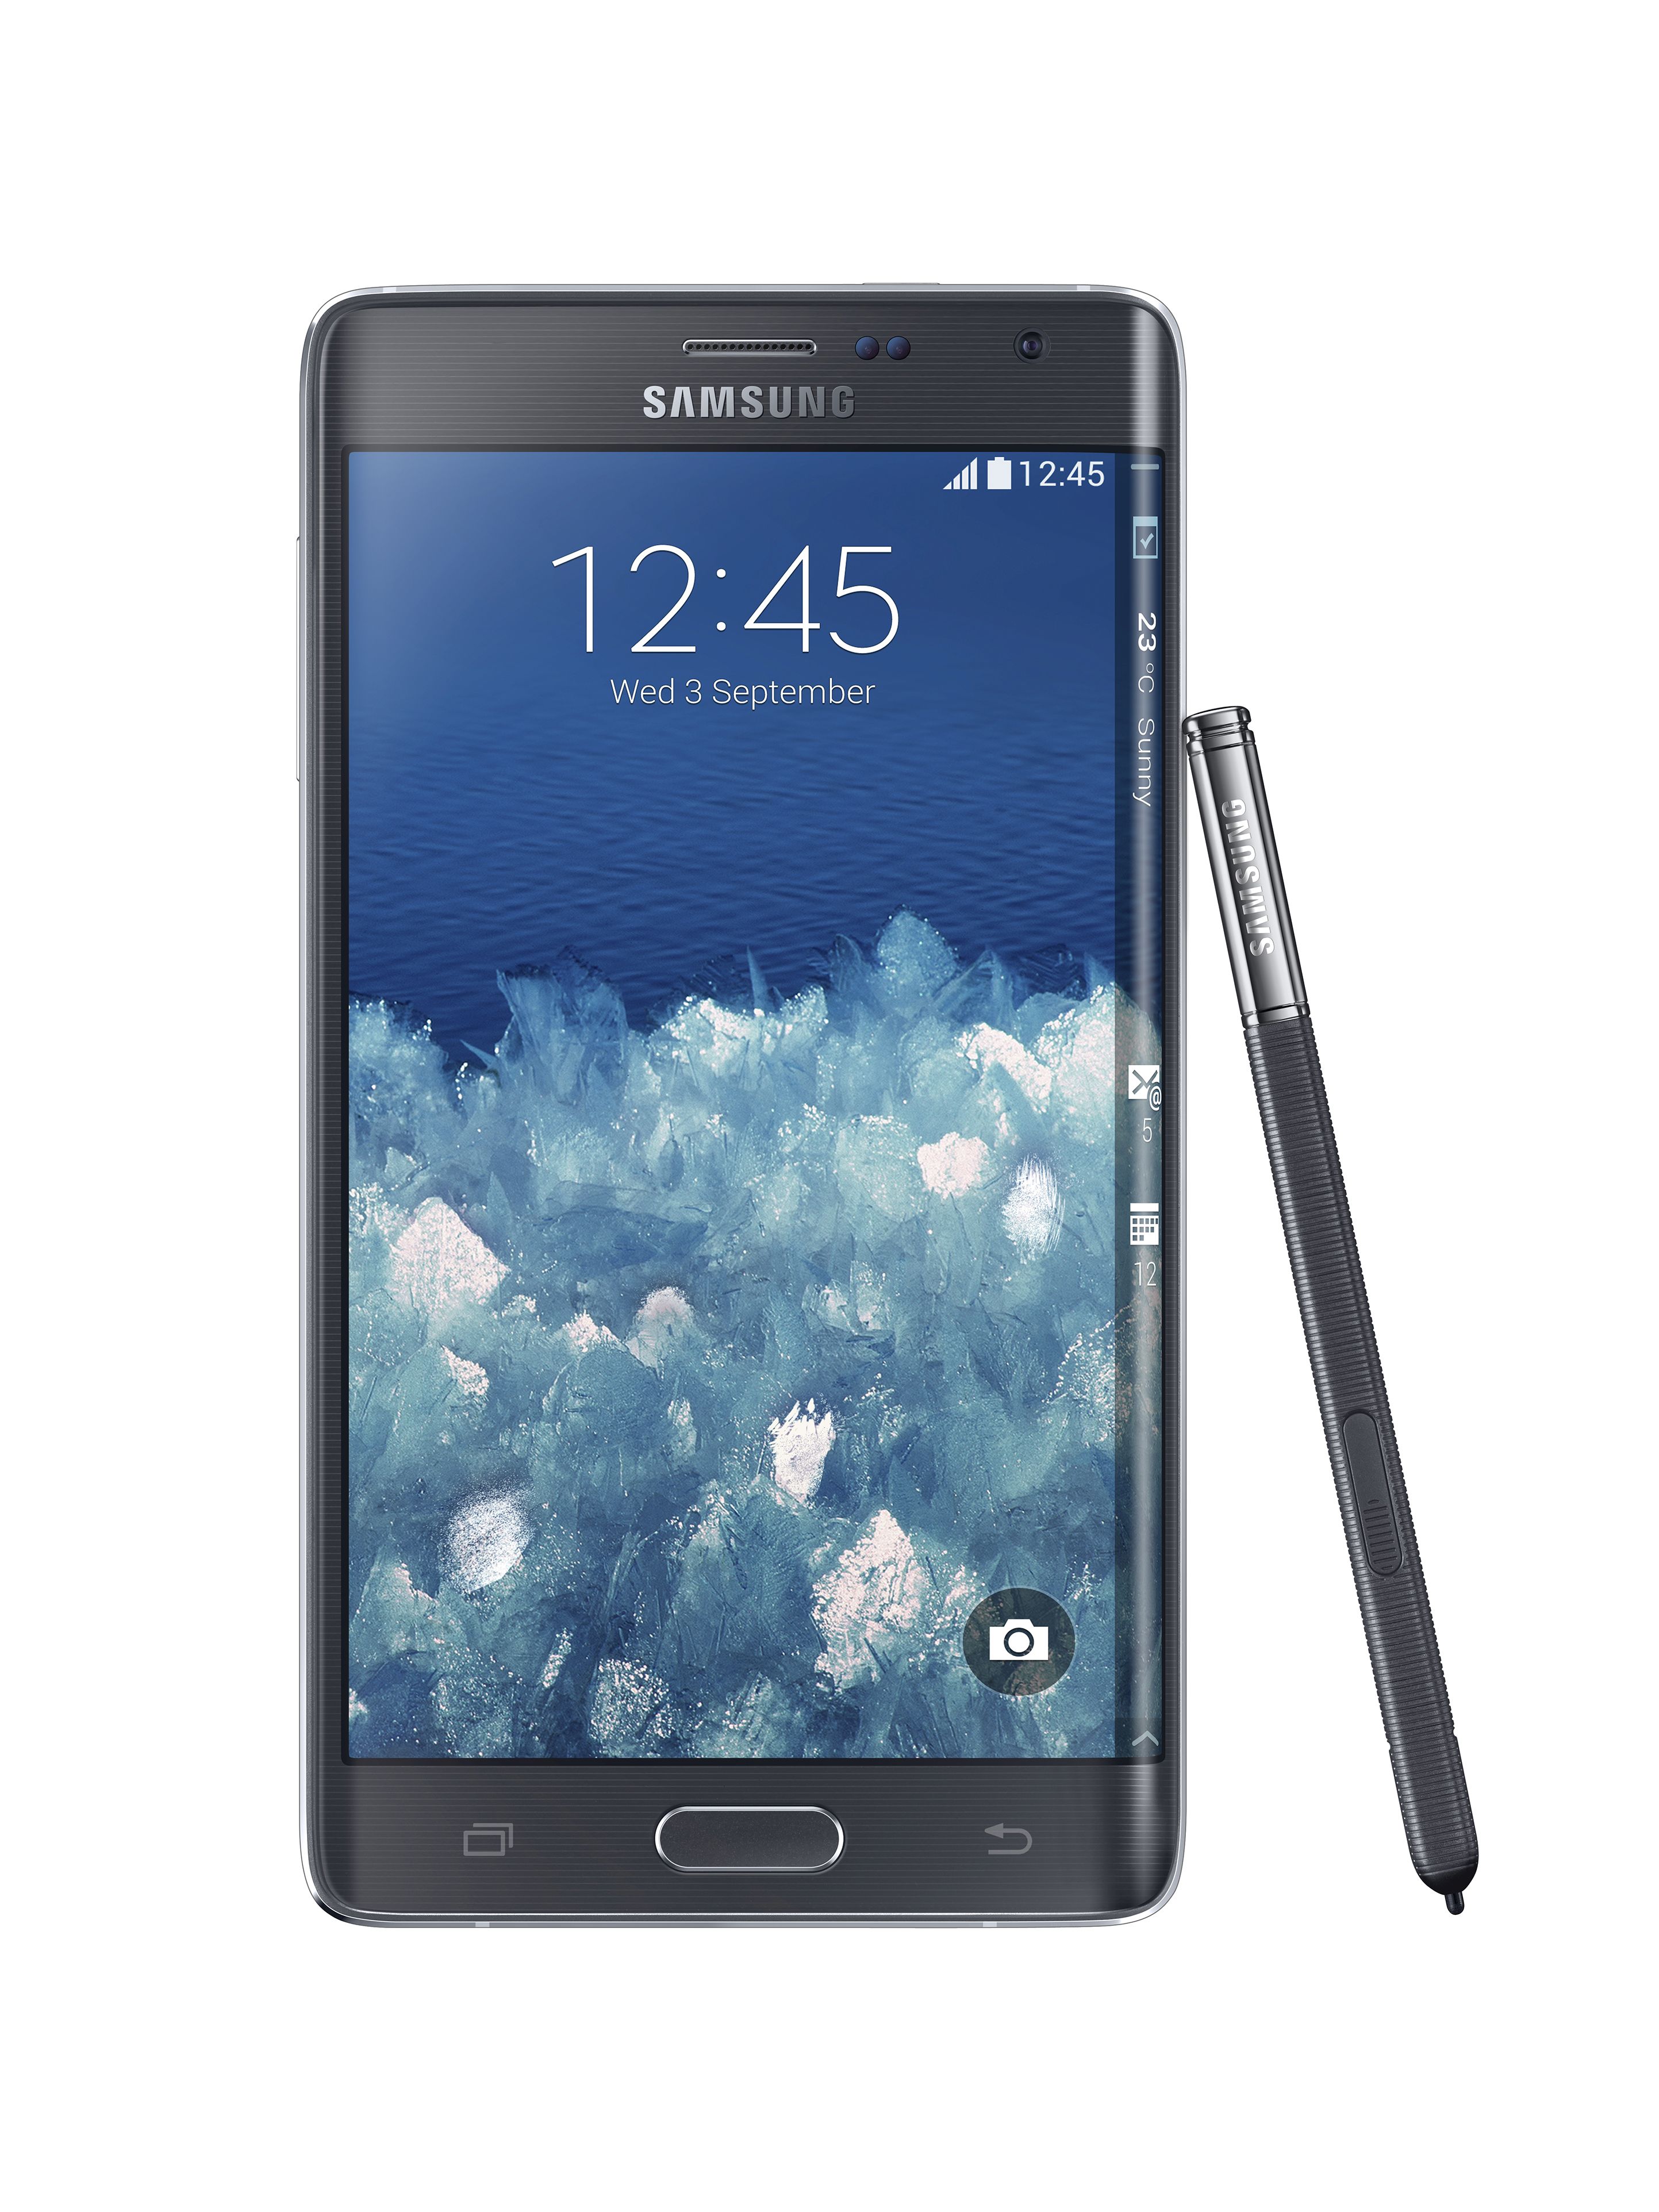 Samsung unveils the Galaxy Note Edge with a curved display